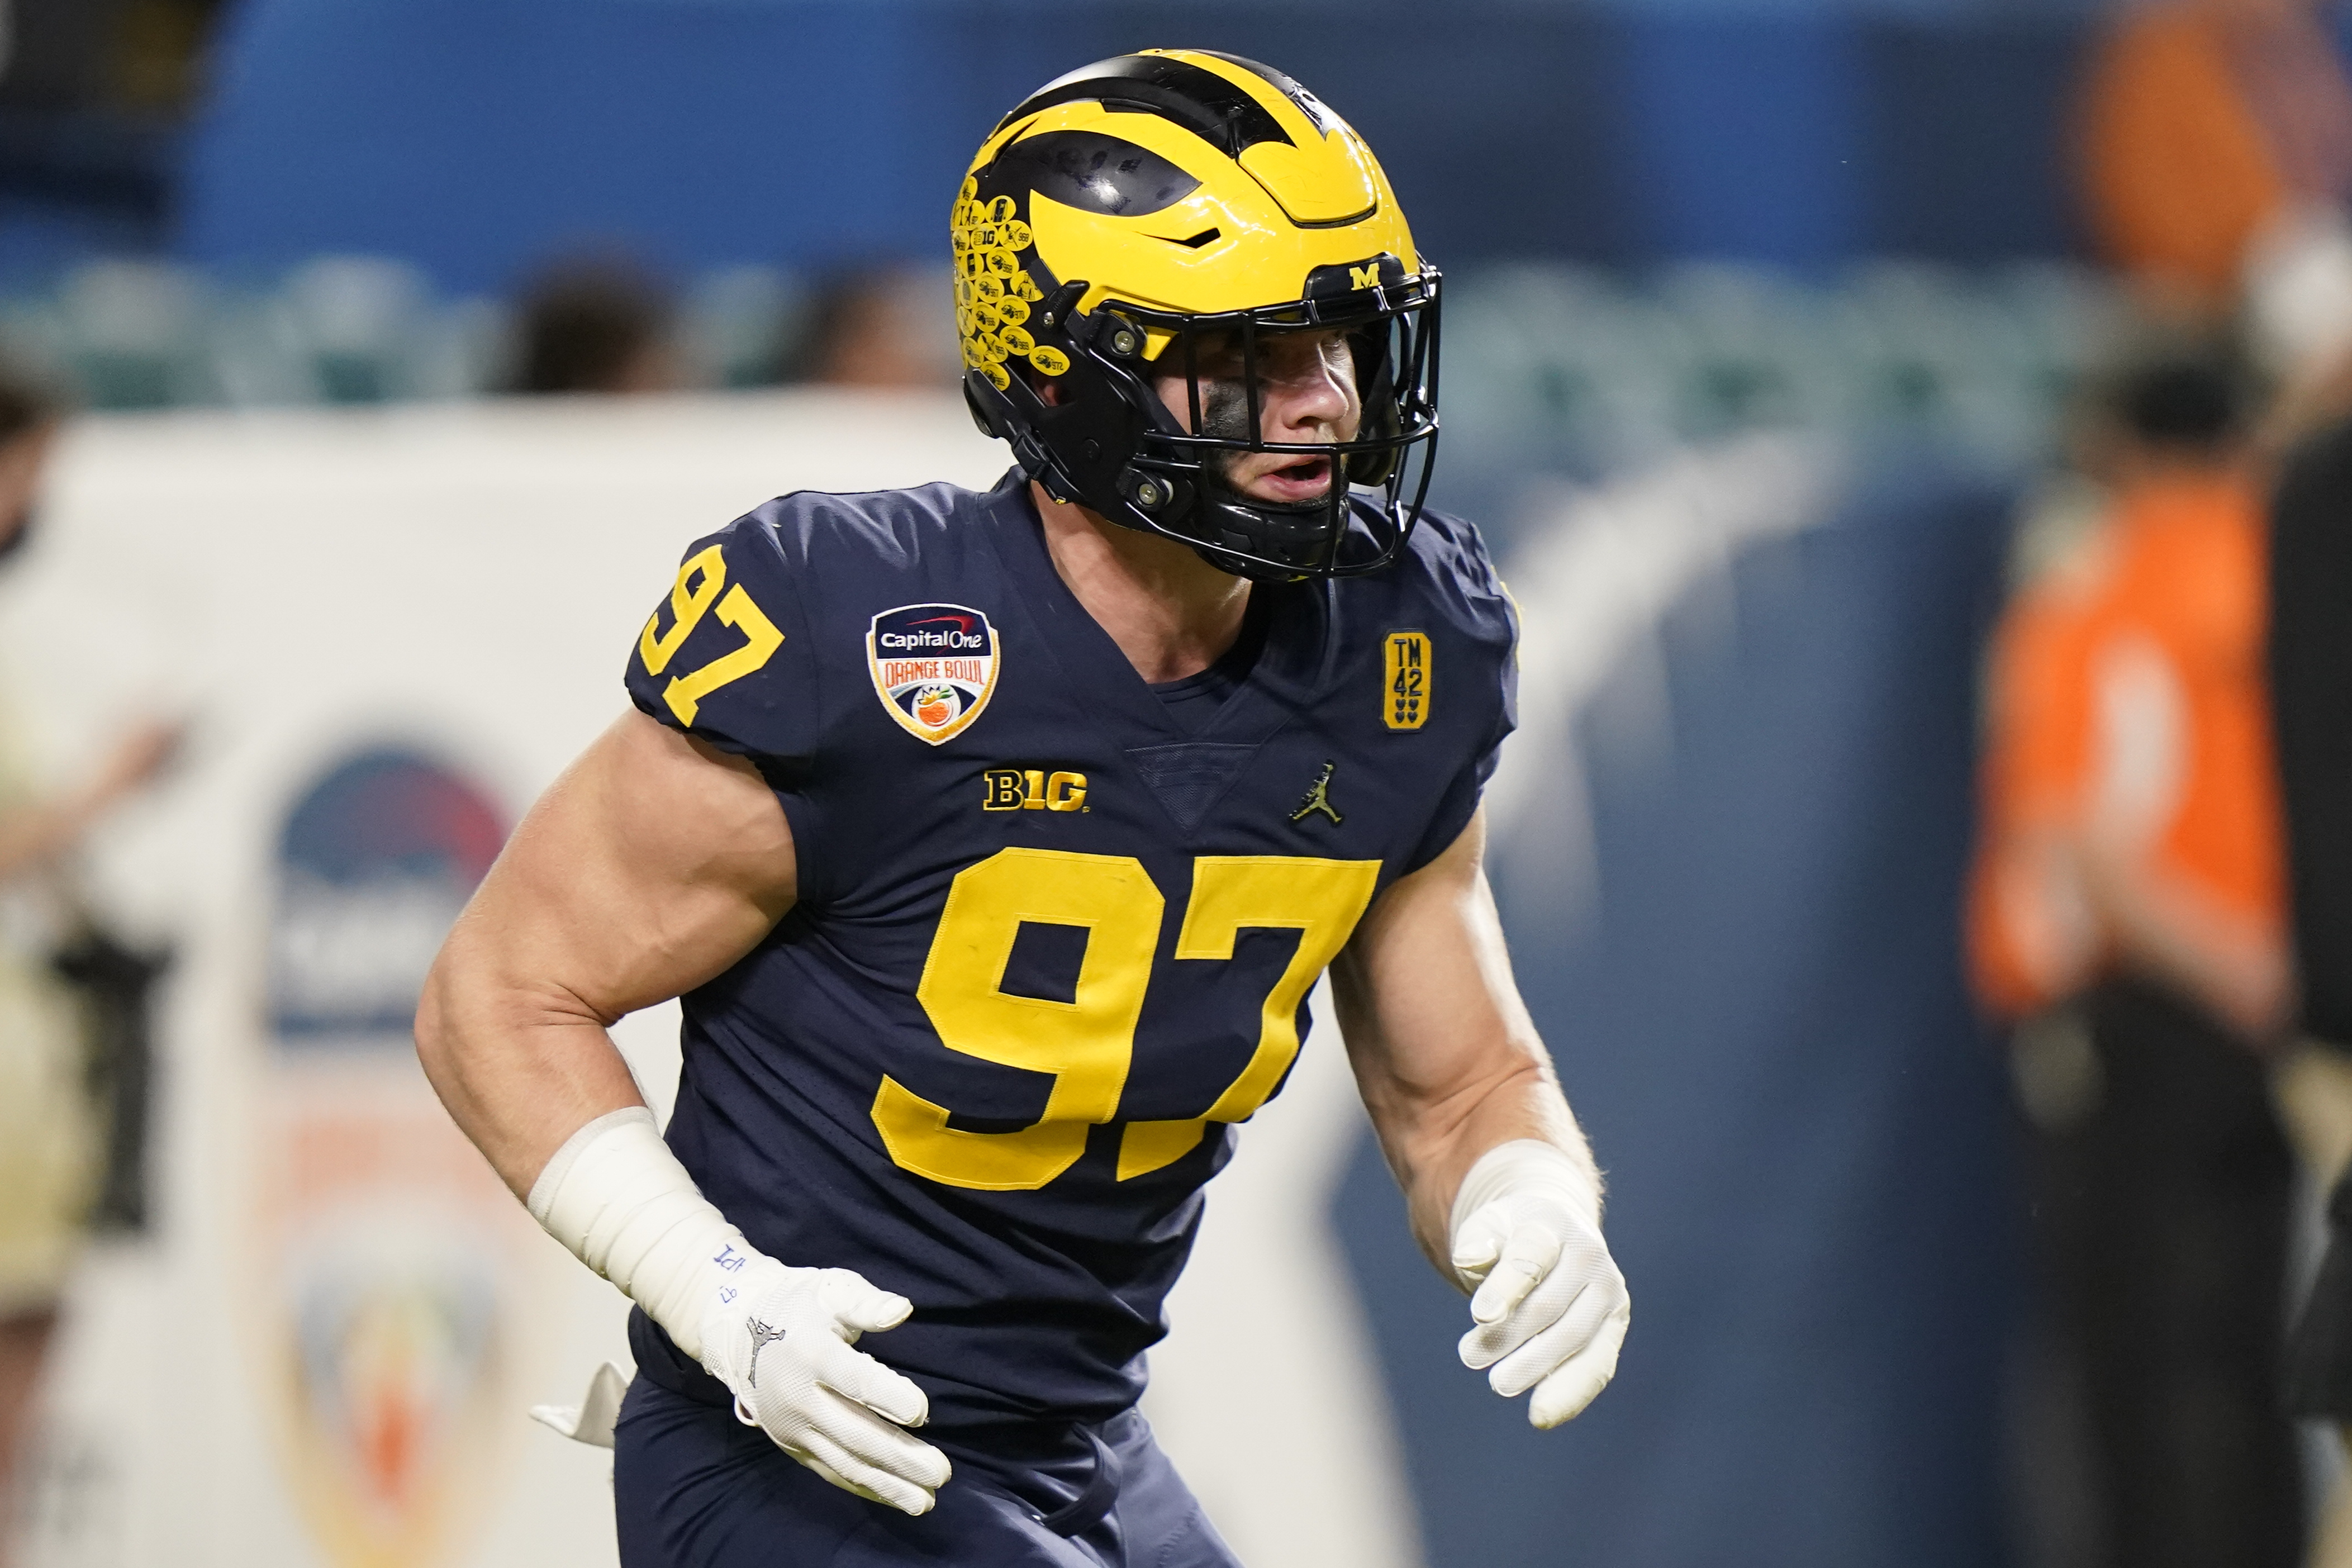 Mel Kiper 2021 NFL Mock Draft: Reacting To All 32 Round 1 Selections 